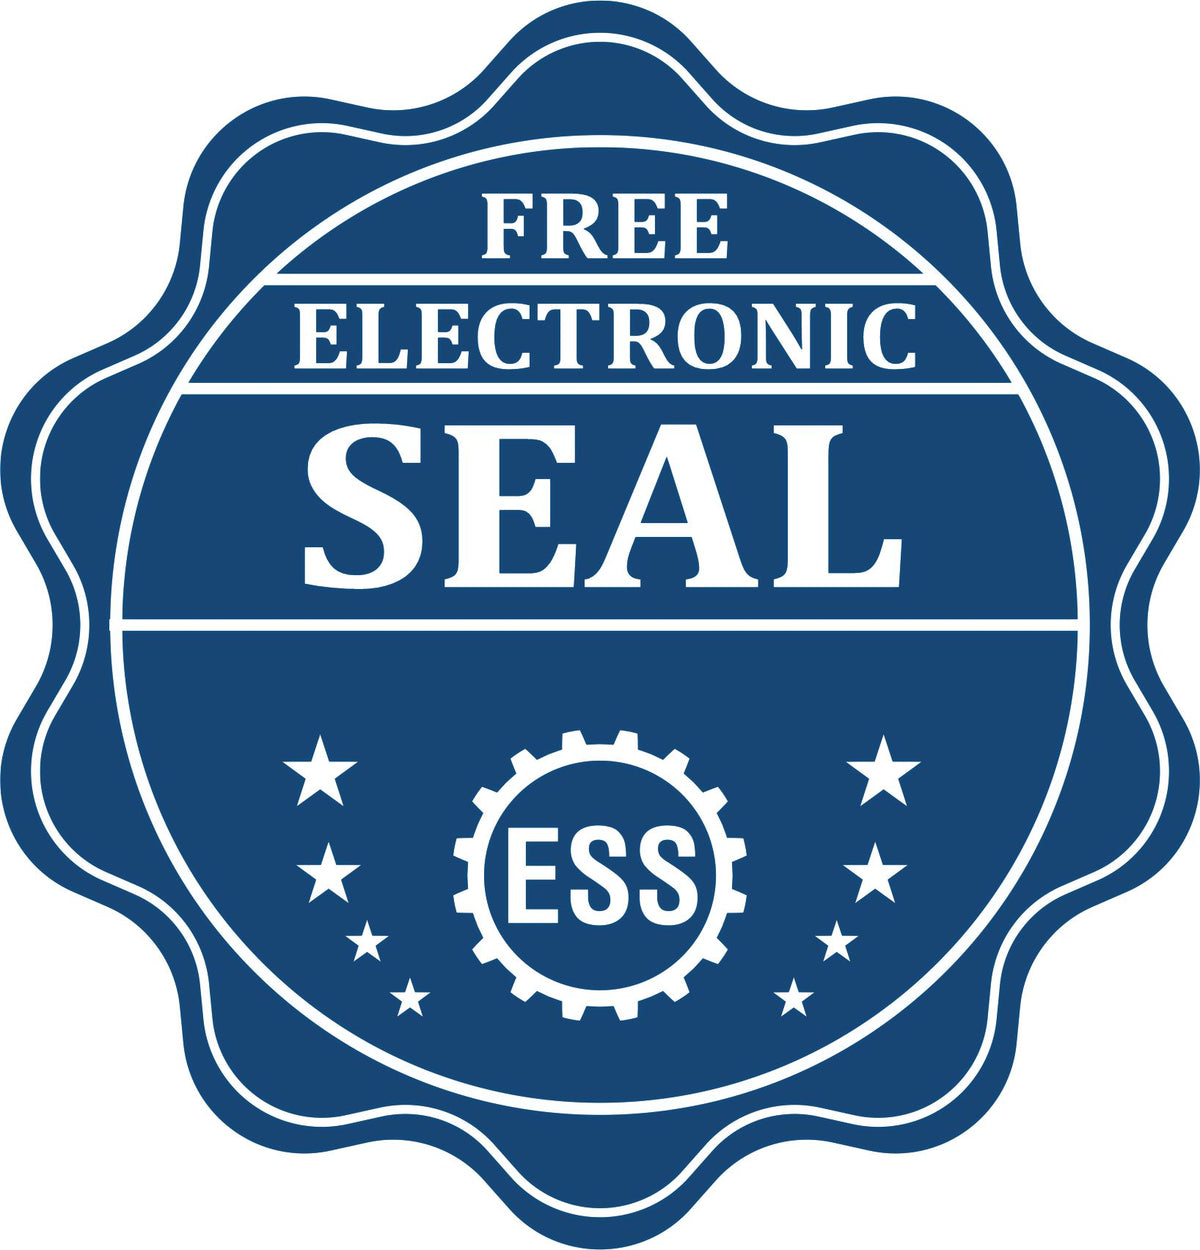 A badge showing a free electronic seal for the Handheld Massachusetts Professional Geologist Embosser with stars and the ESS gear on the emblem.